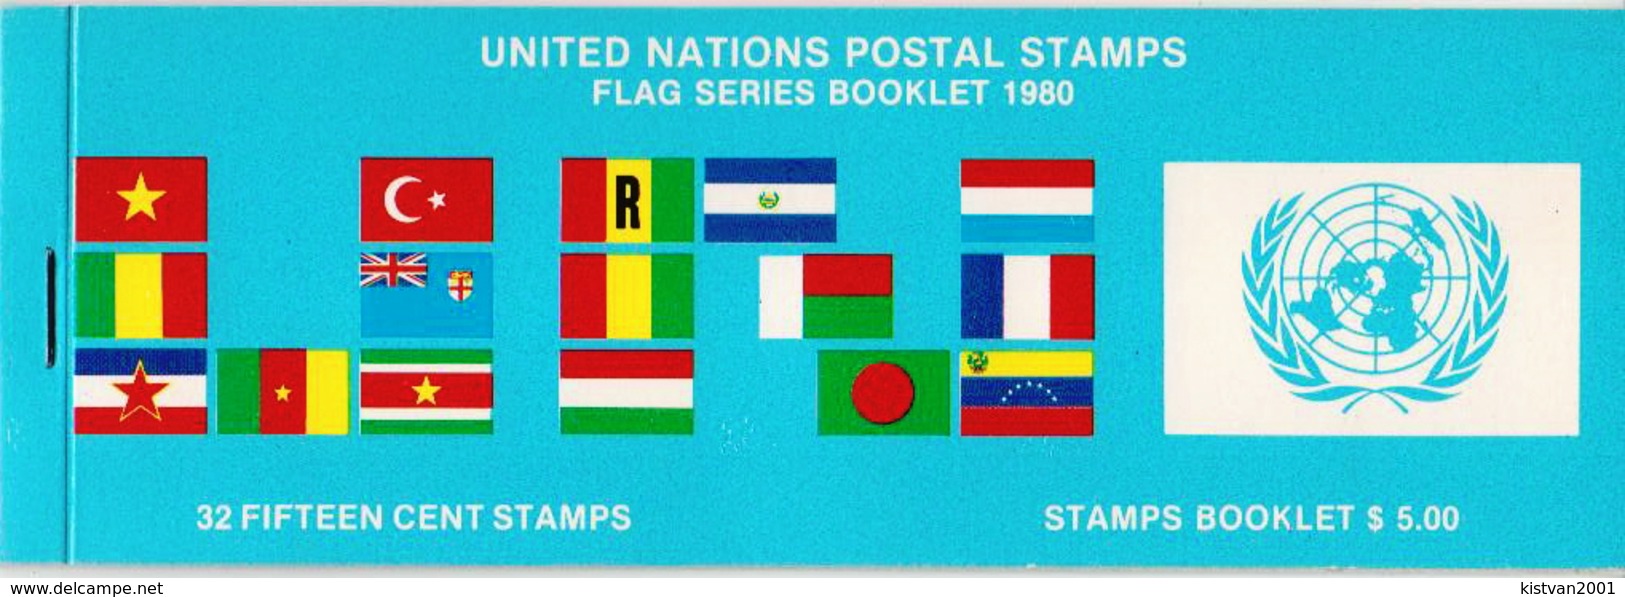 UNO - Flags Booklet - Stamps